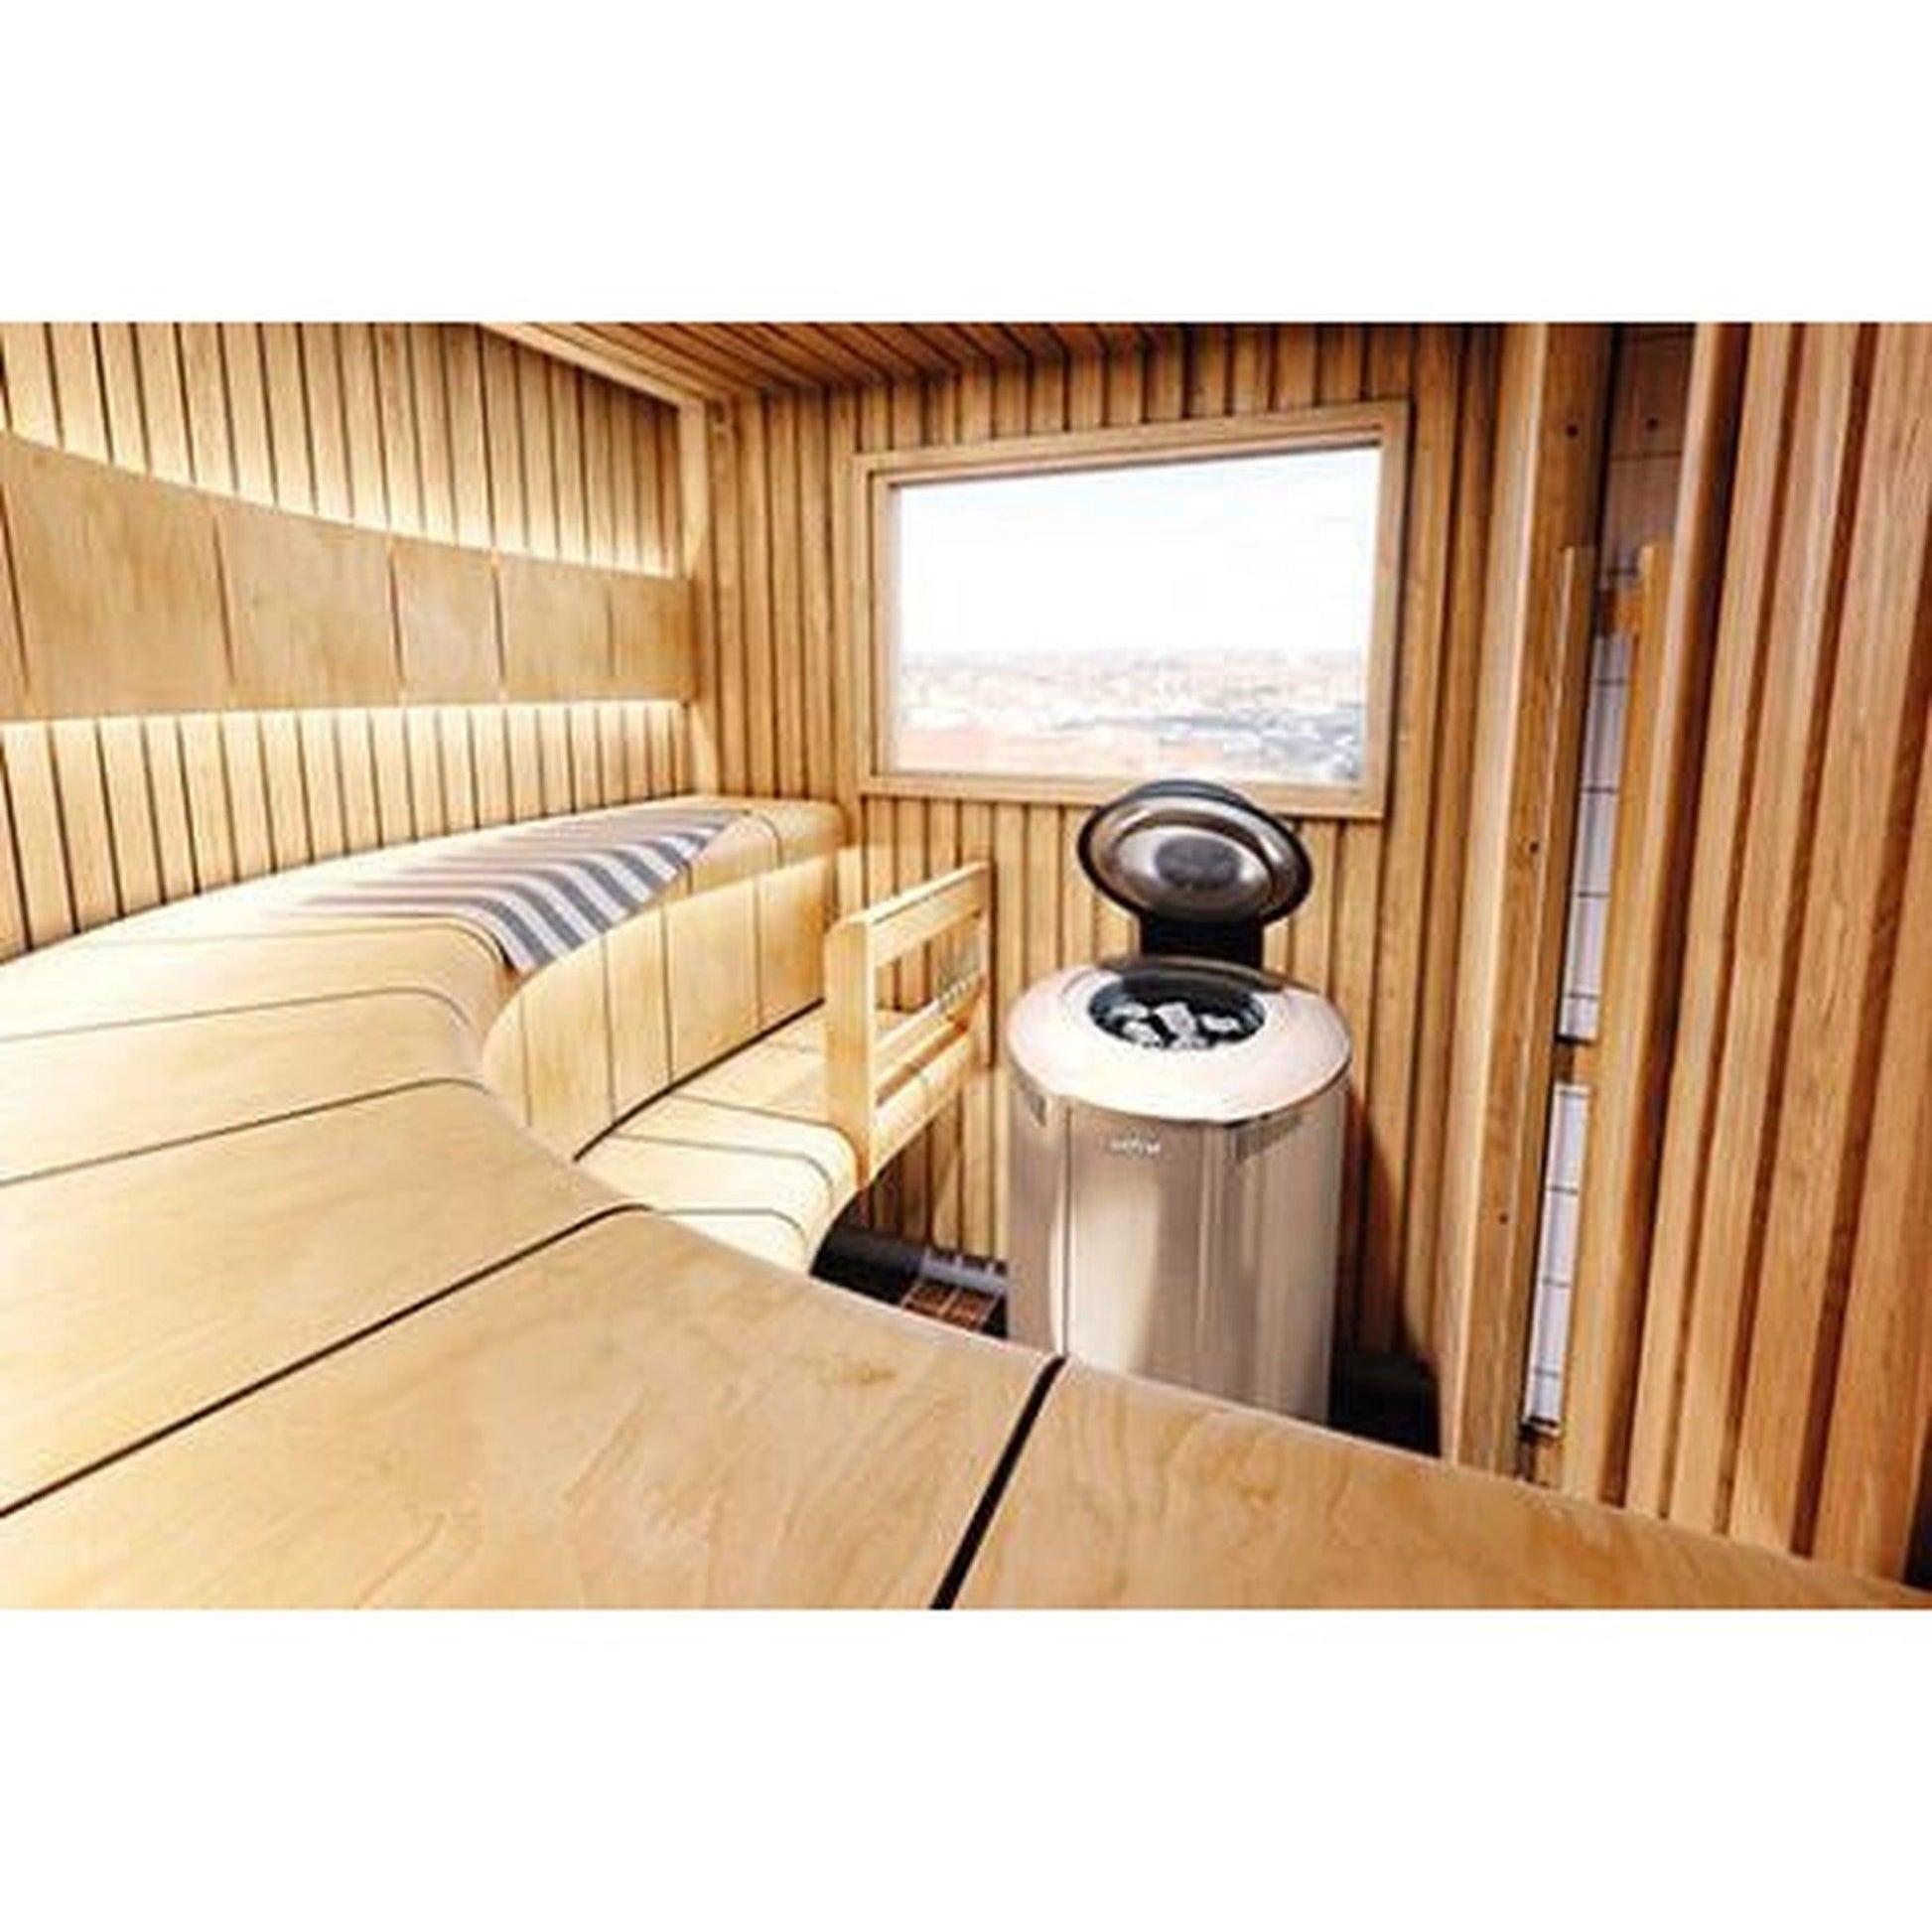 Harvia Forte 9.8 kW 240V 1PH Stainless Steel Sauna Heater With Digital Control Panel